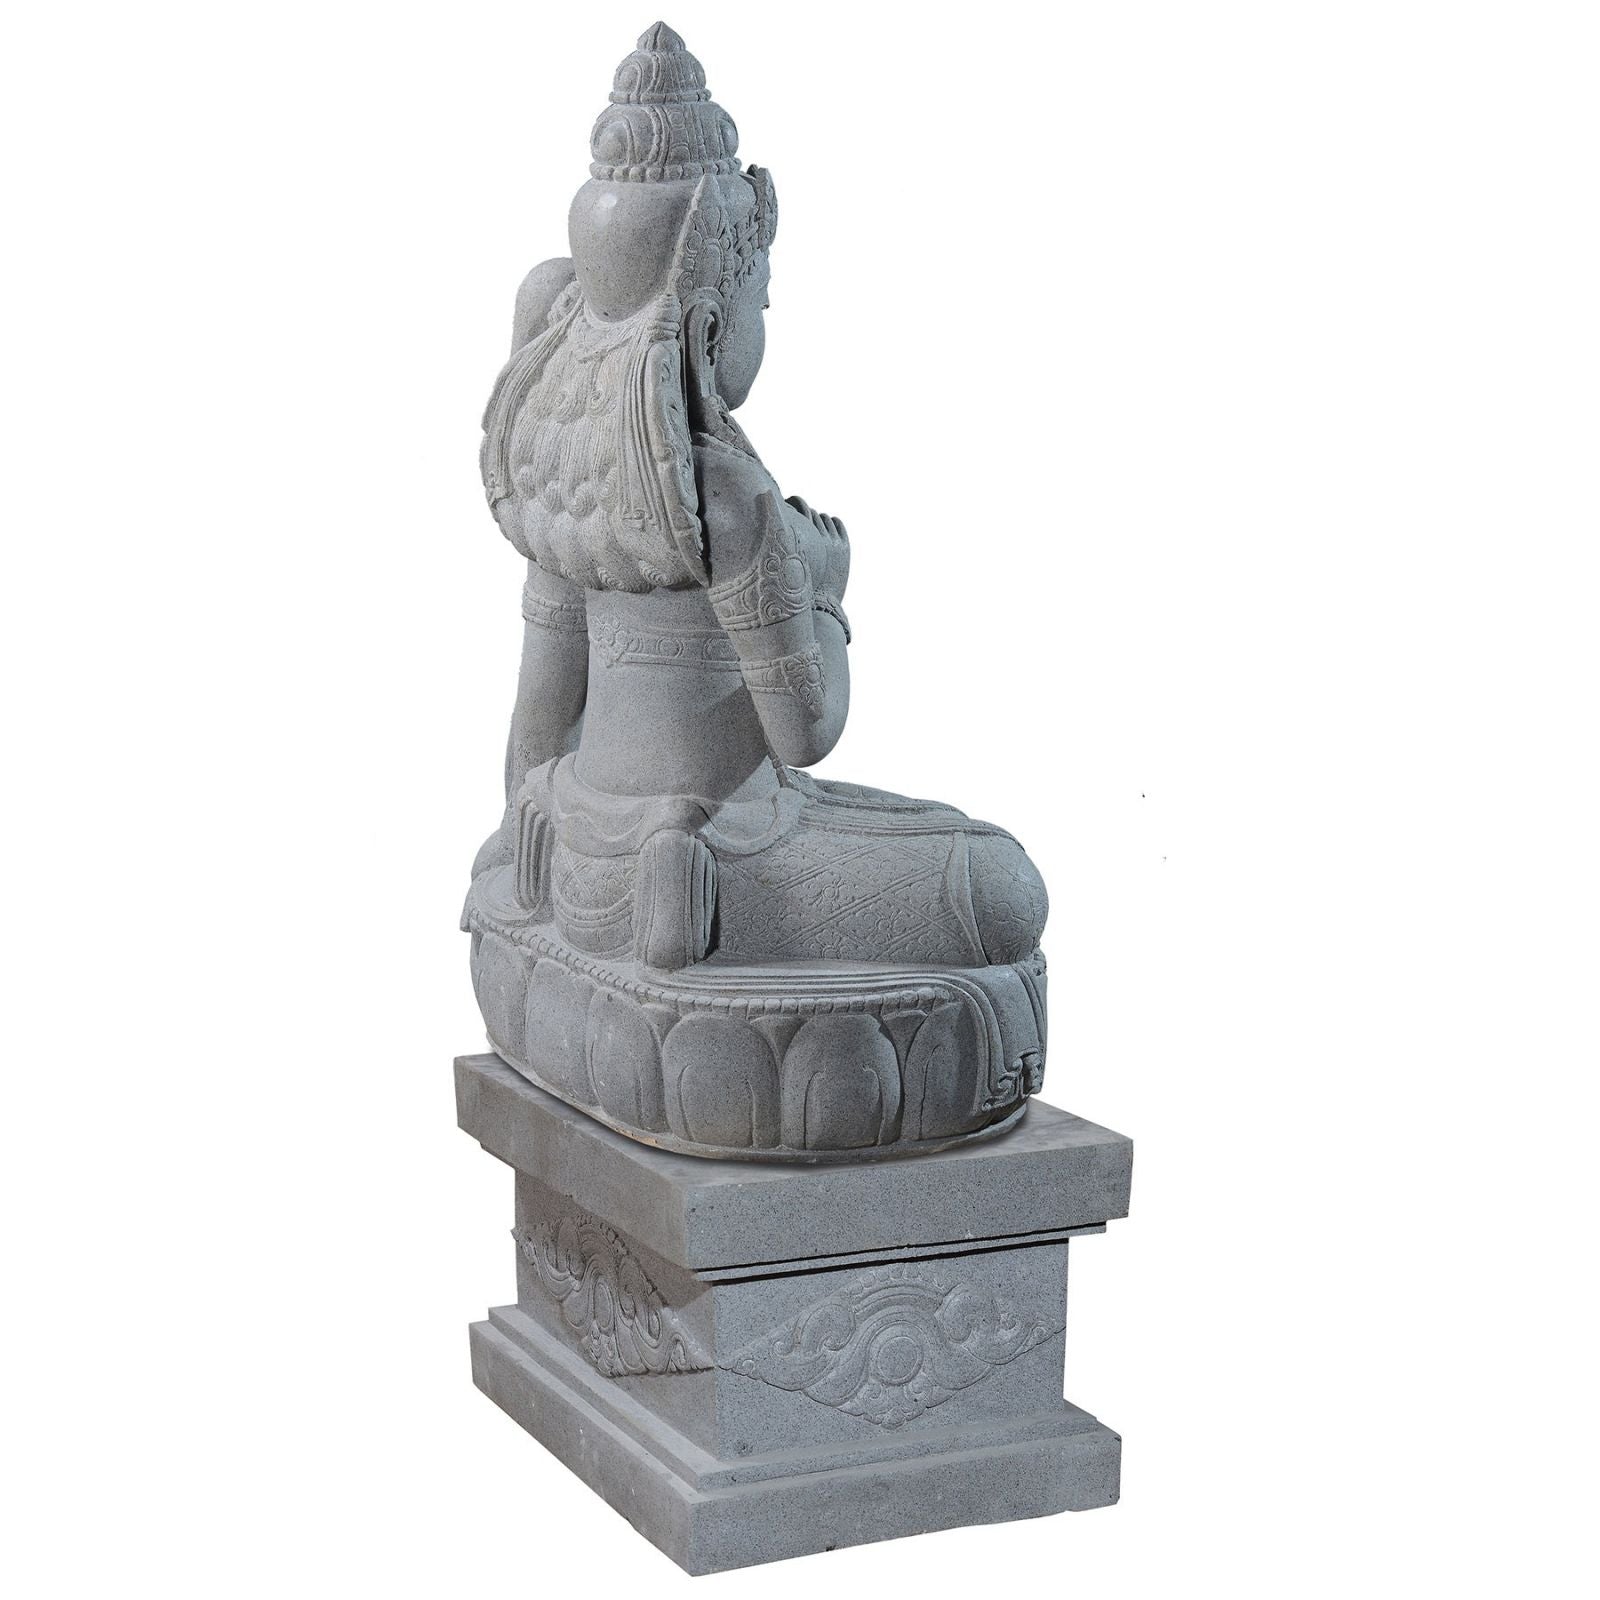 Large garden Stone statue of sitting Dewi Sri - Goddess of the earth